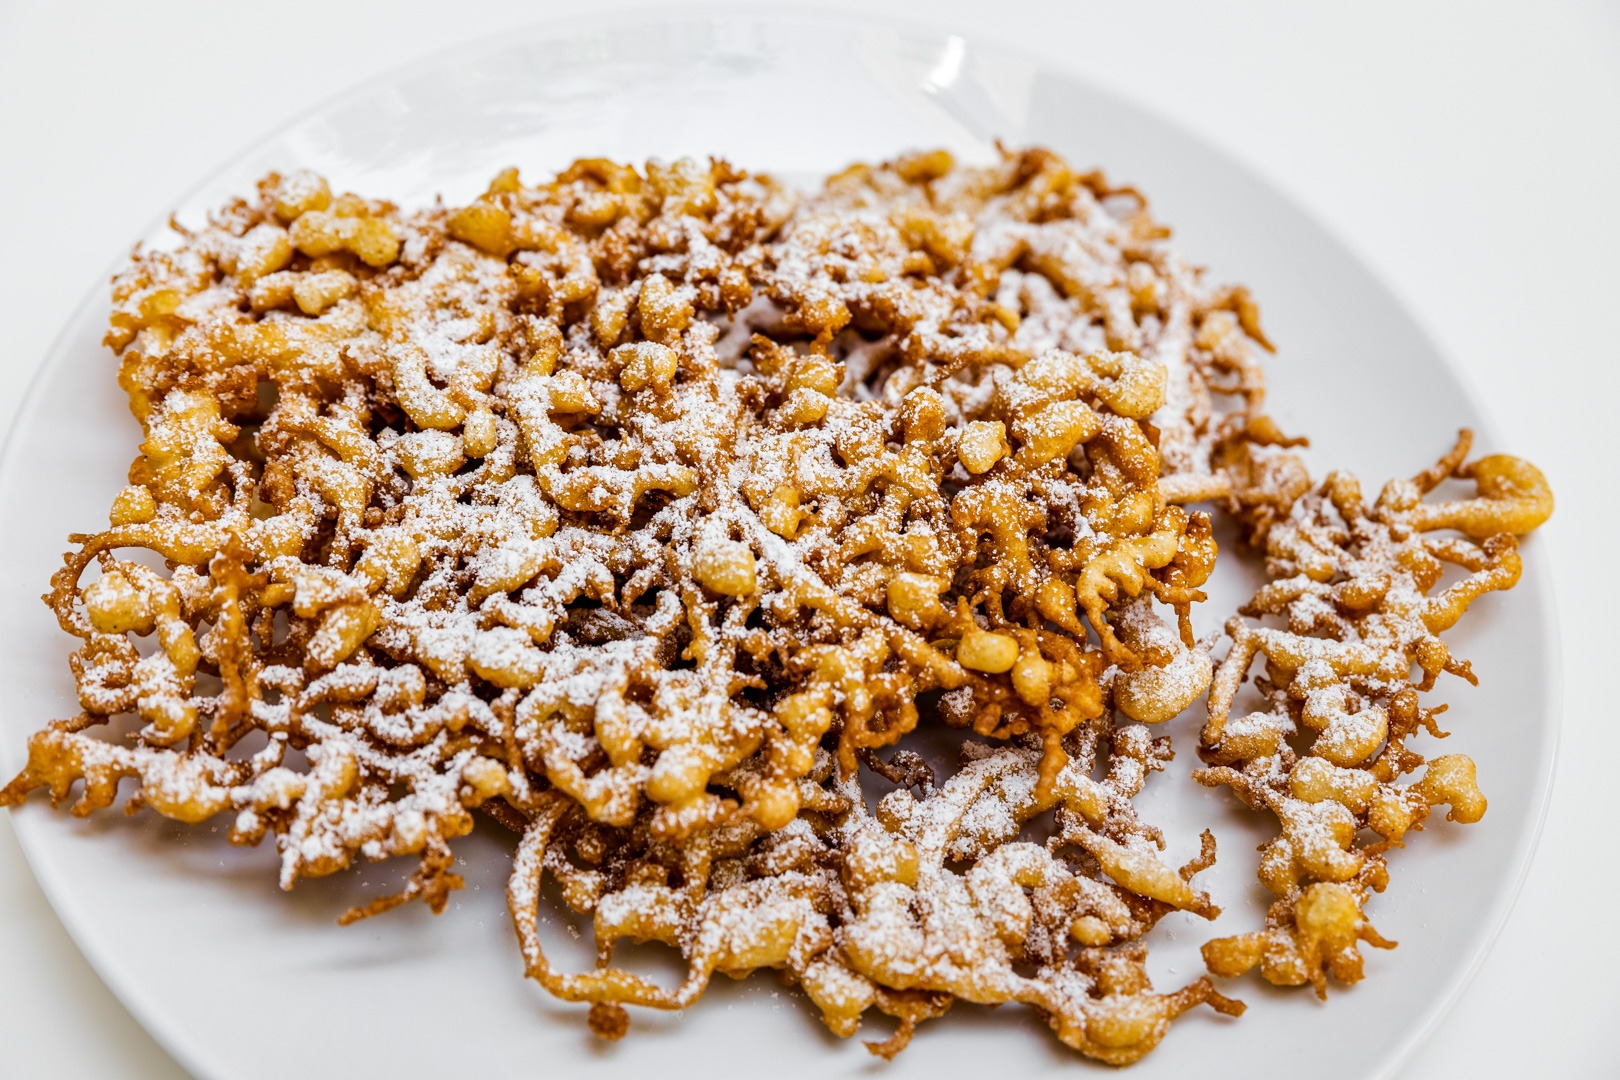 https://blog.thermoworks.com/wp-content/uploads/2020/09/Funnel_Cakes_Compressed-36.jpg